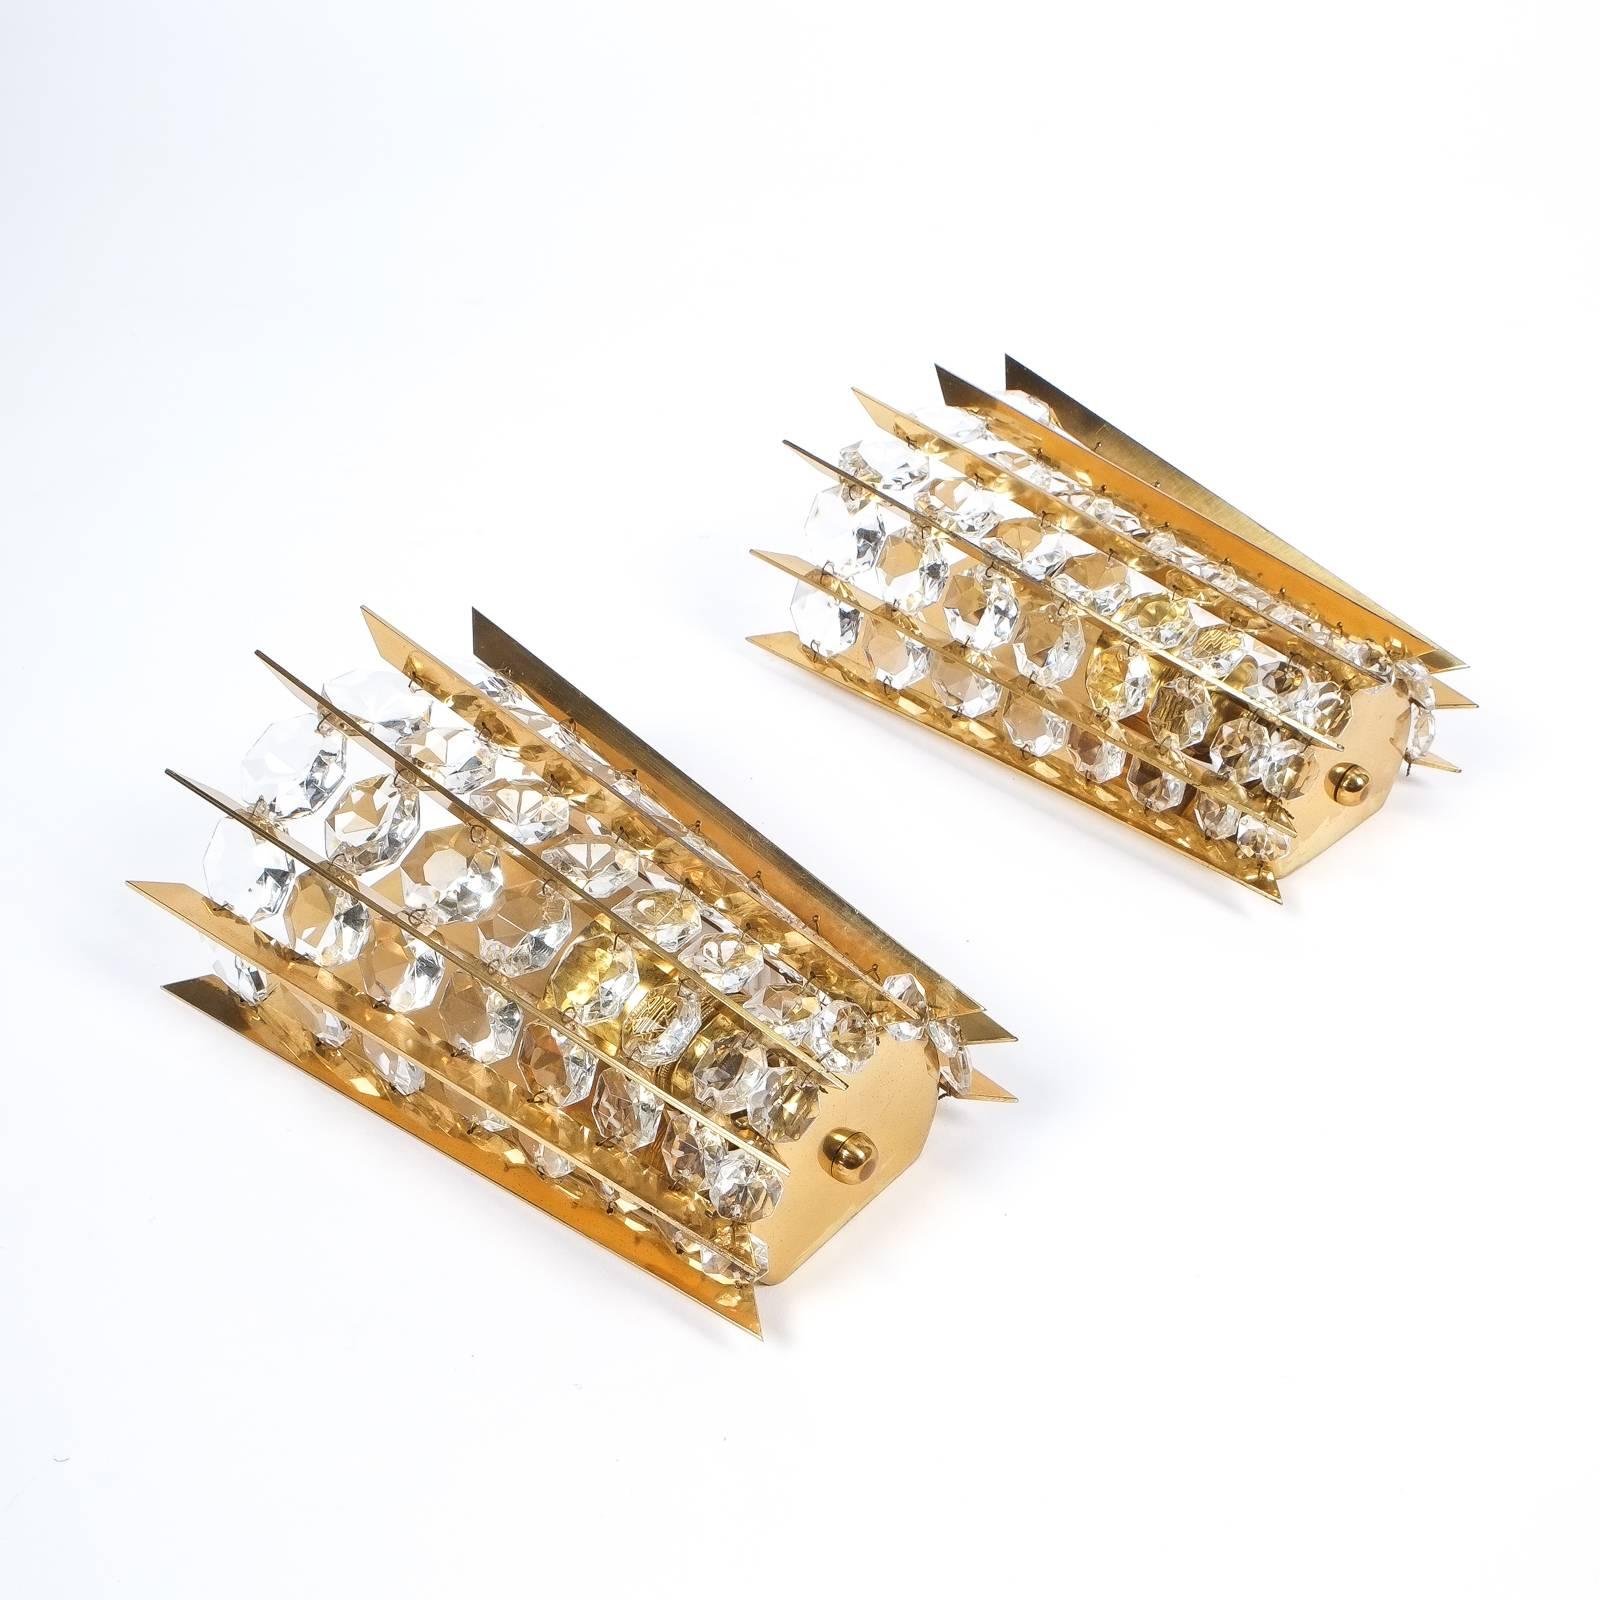 Rare set of 5 identical wall lights by Bakalowits & Sohne, Austria, circa 1955 - Priced individually

Radial array of expressively shaped brass-ware with rows of diamond cut crystals increasing/decreasing in size, These lights are handmade and are